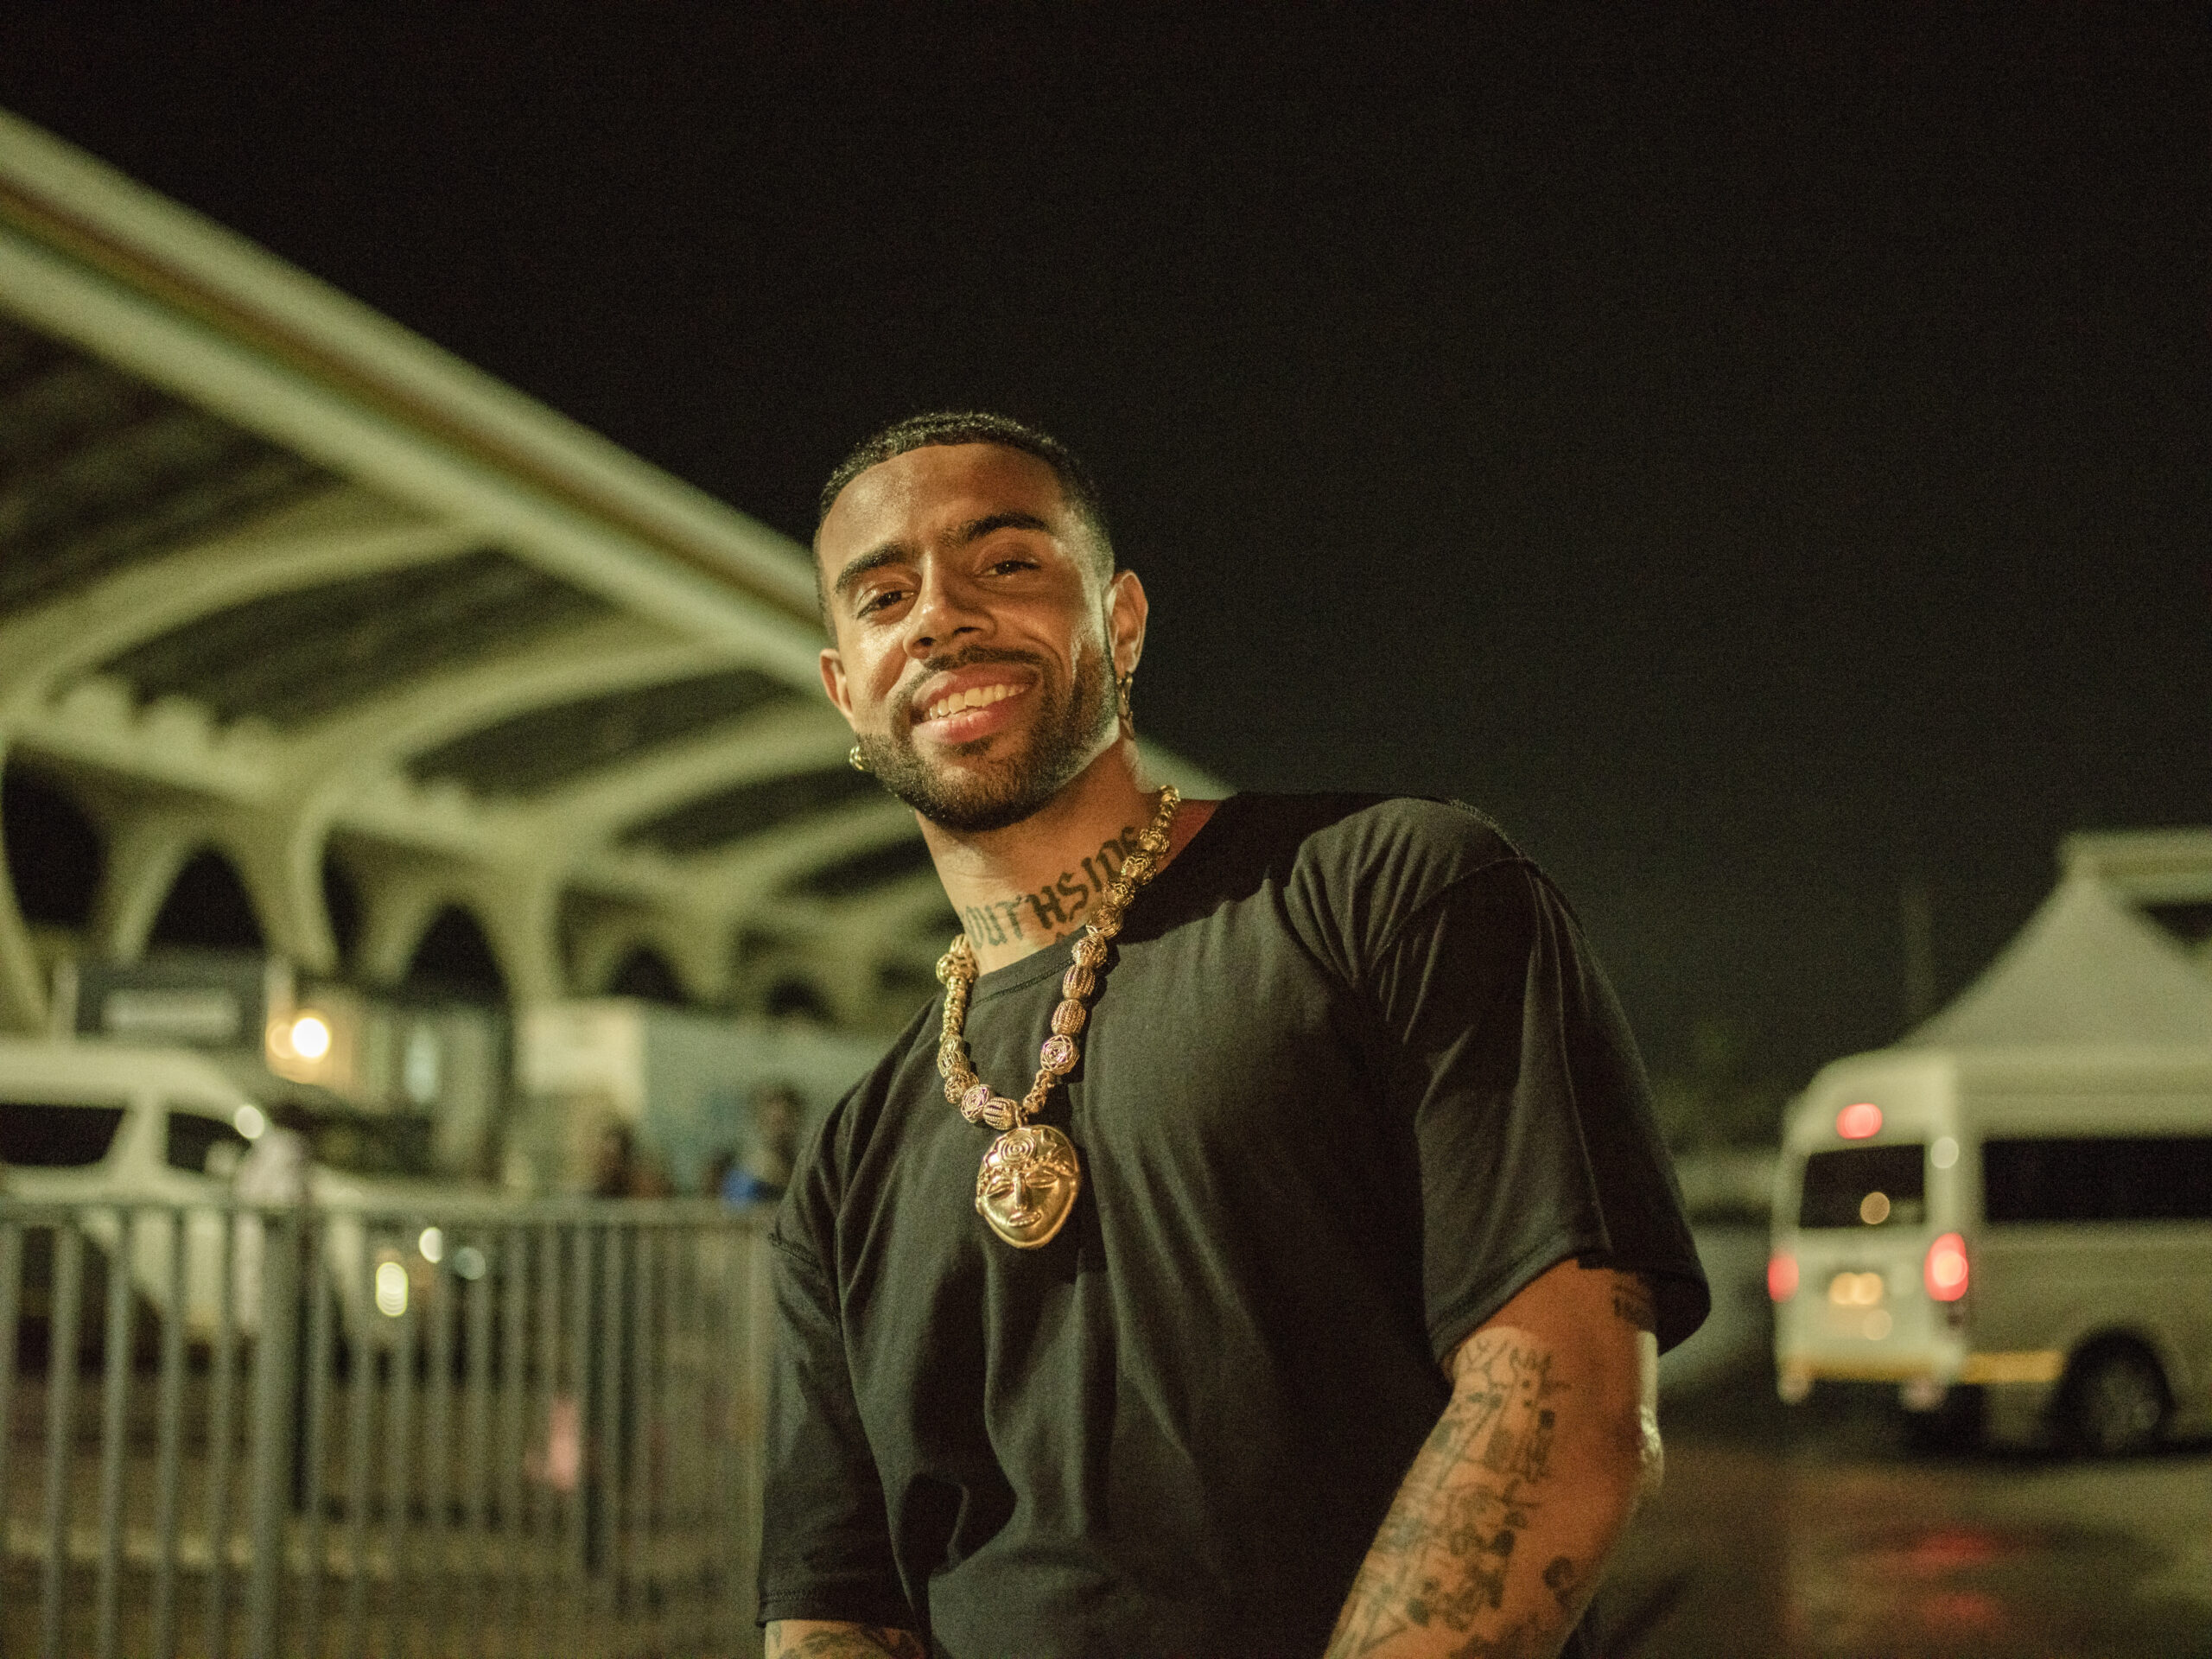 Black Star Line festival founder and Grammy-nominated artist Vic Mensa in Accra, Ghana